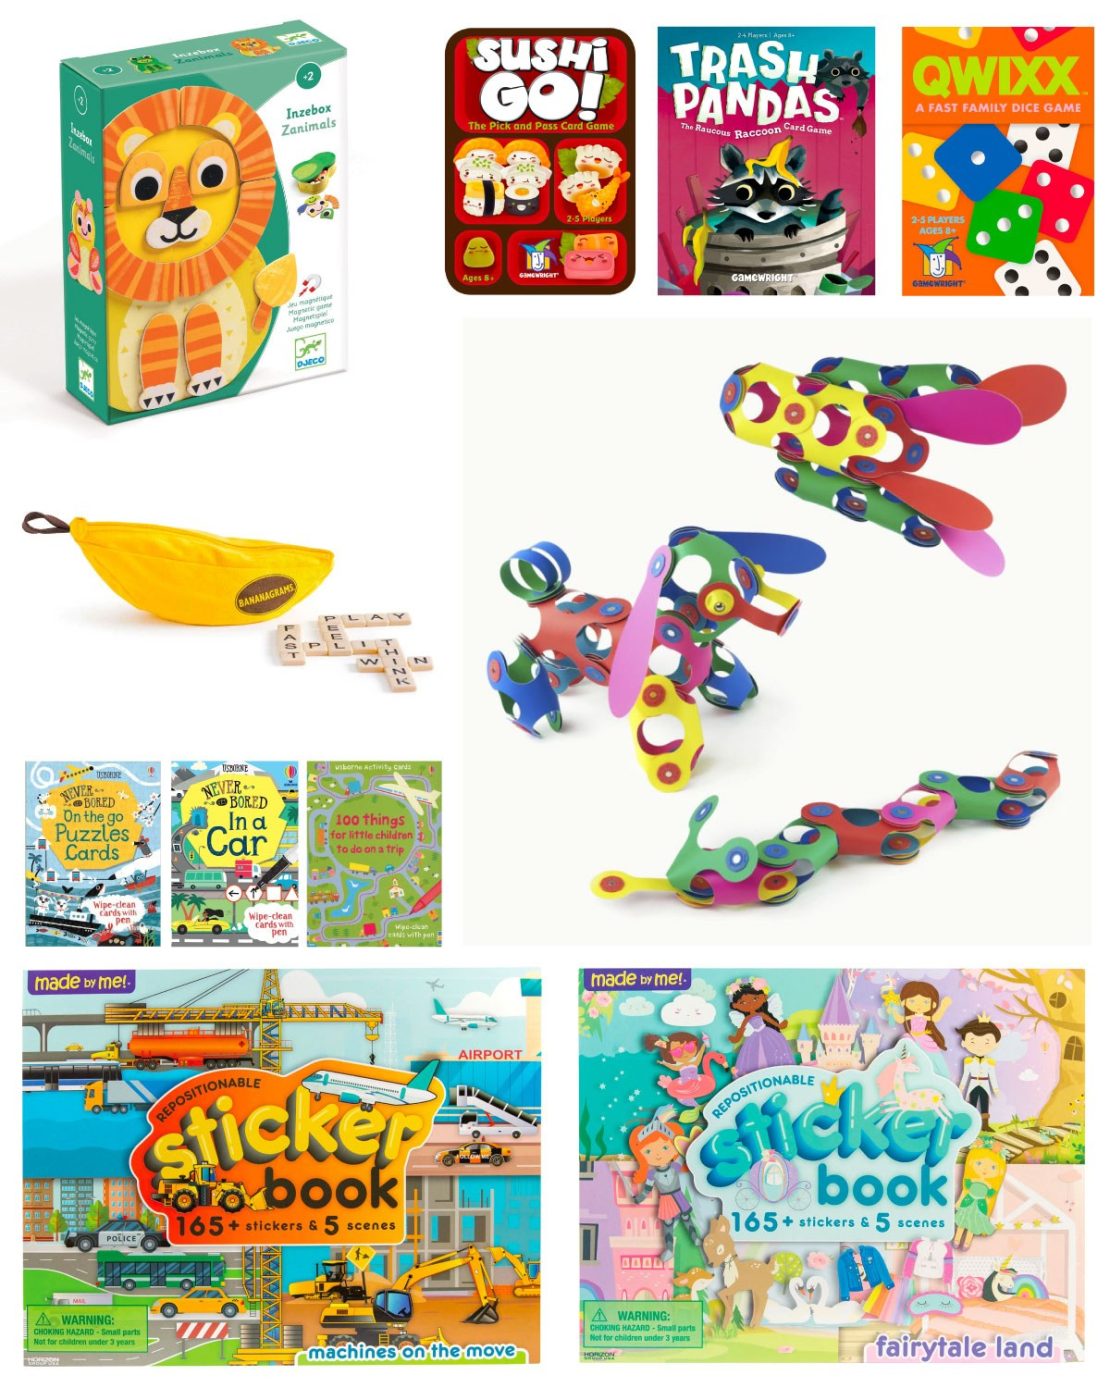 Toys, Games, Books, and more... Perfect for when your travel days run long.